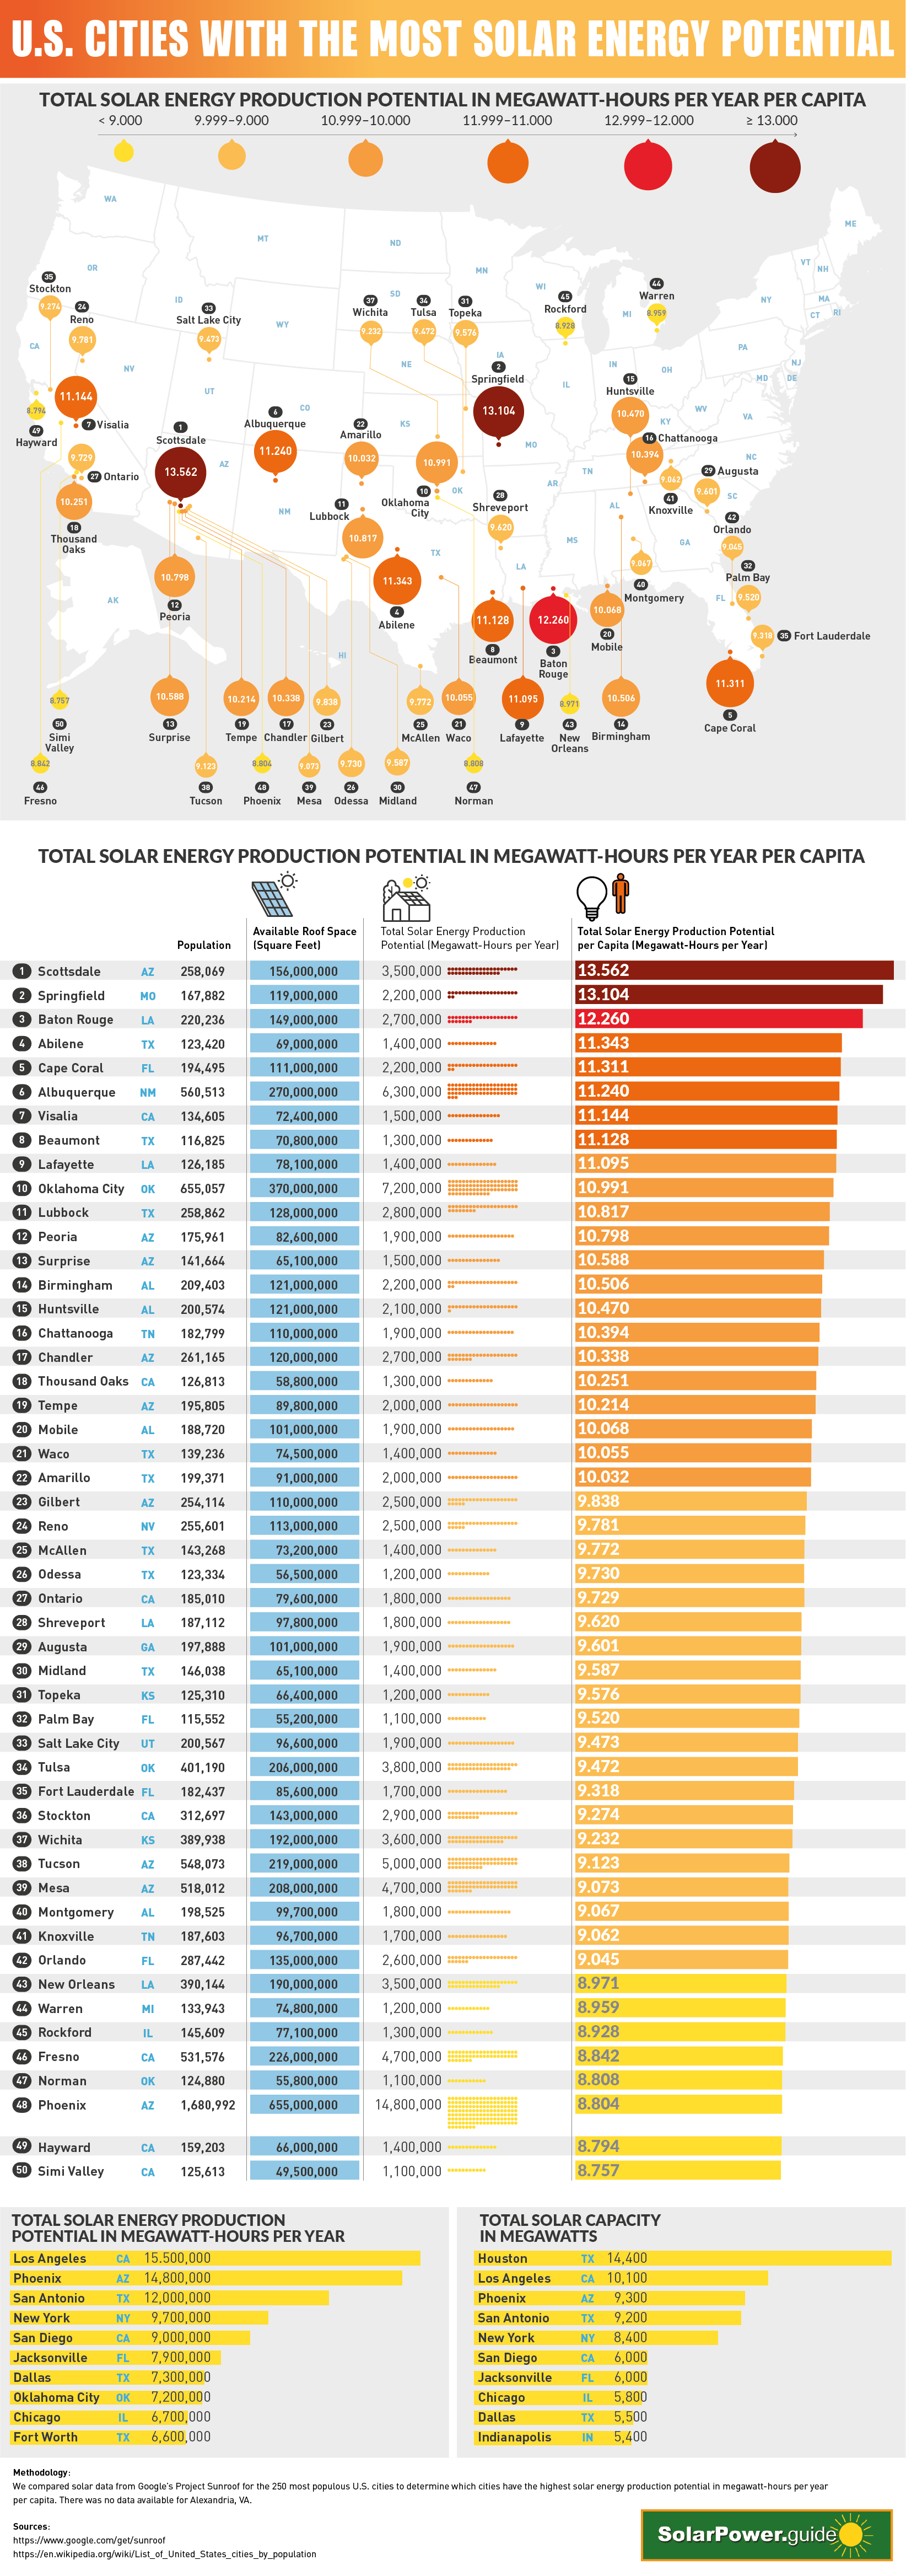 U.S. Cities With the Most Solar Energy Potential - Solar Power Guide - Infographic